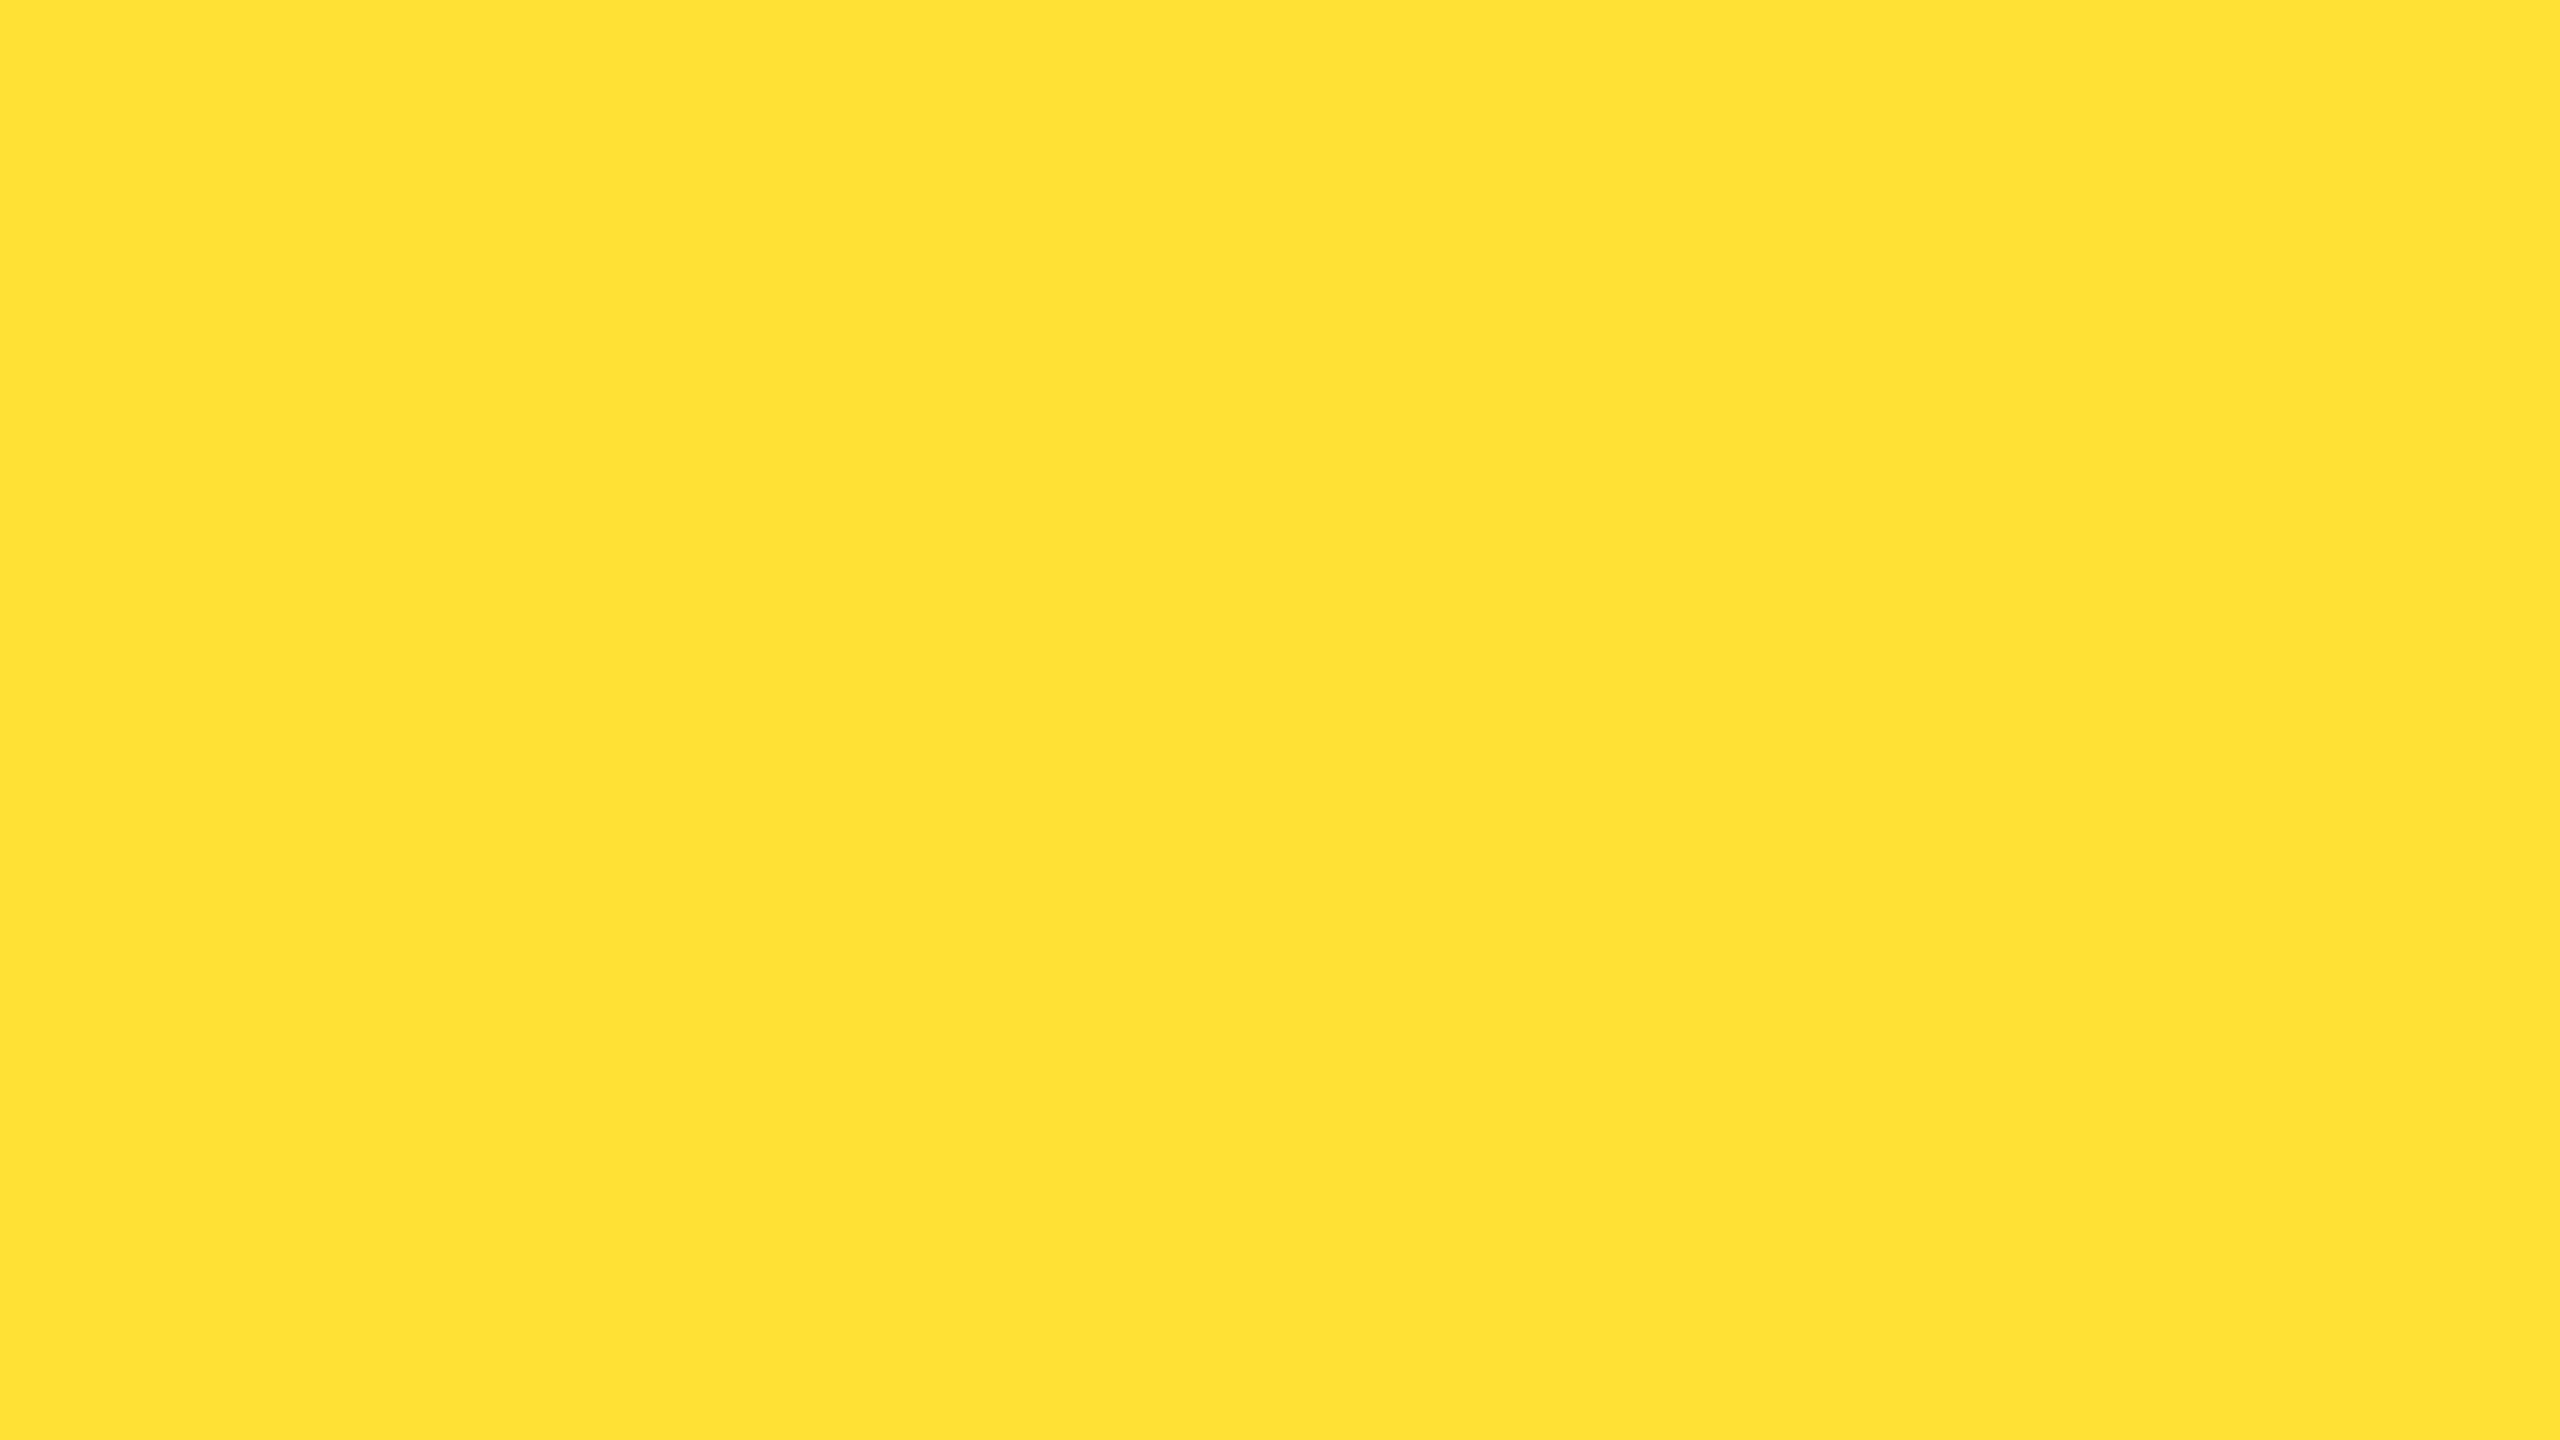 2560x1440 Banana Yellow Solid Color Background